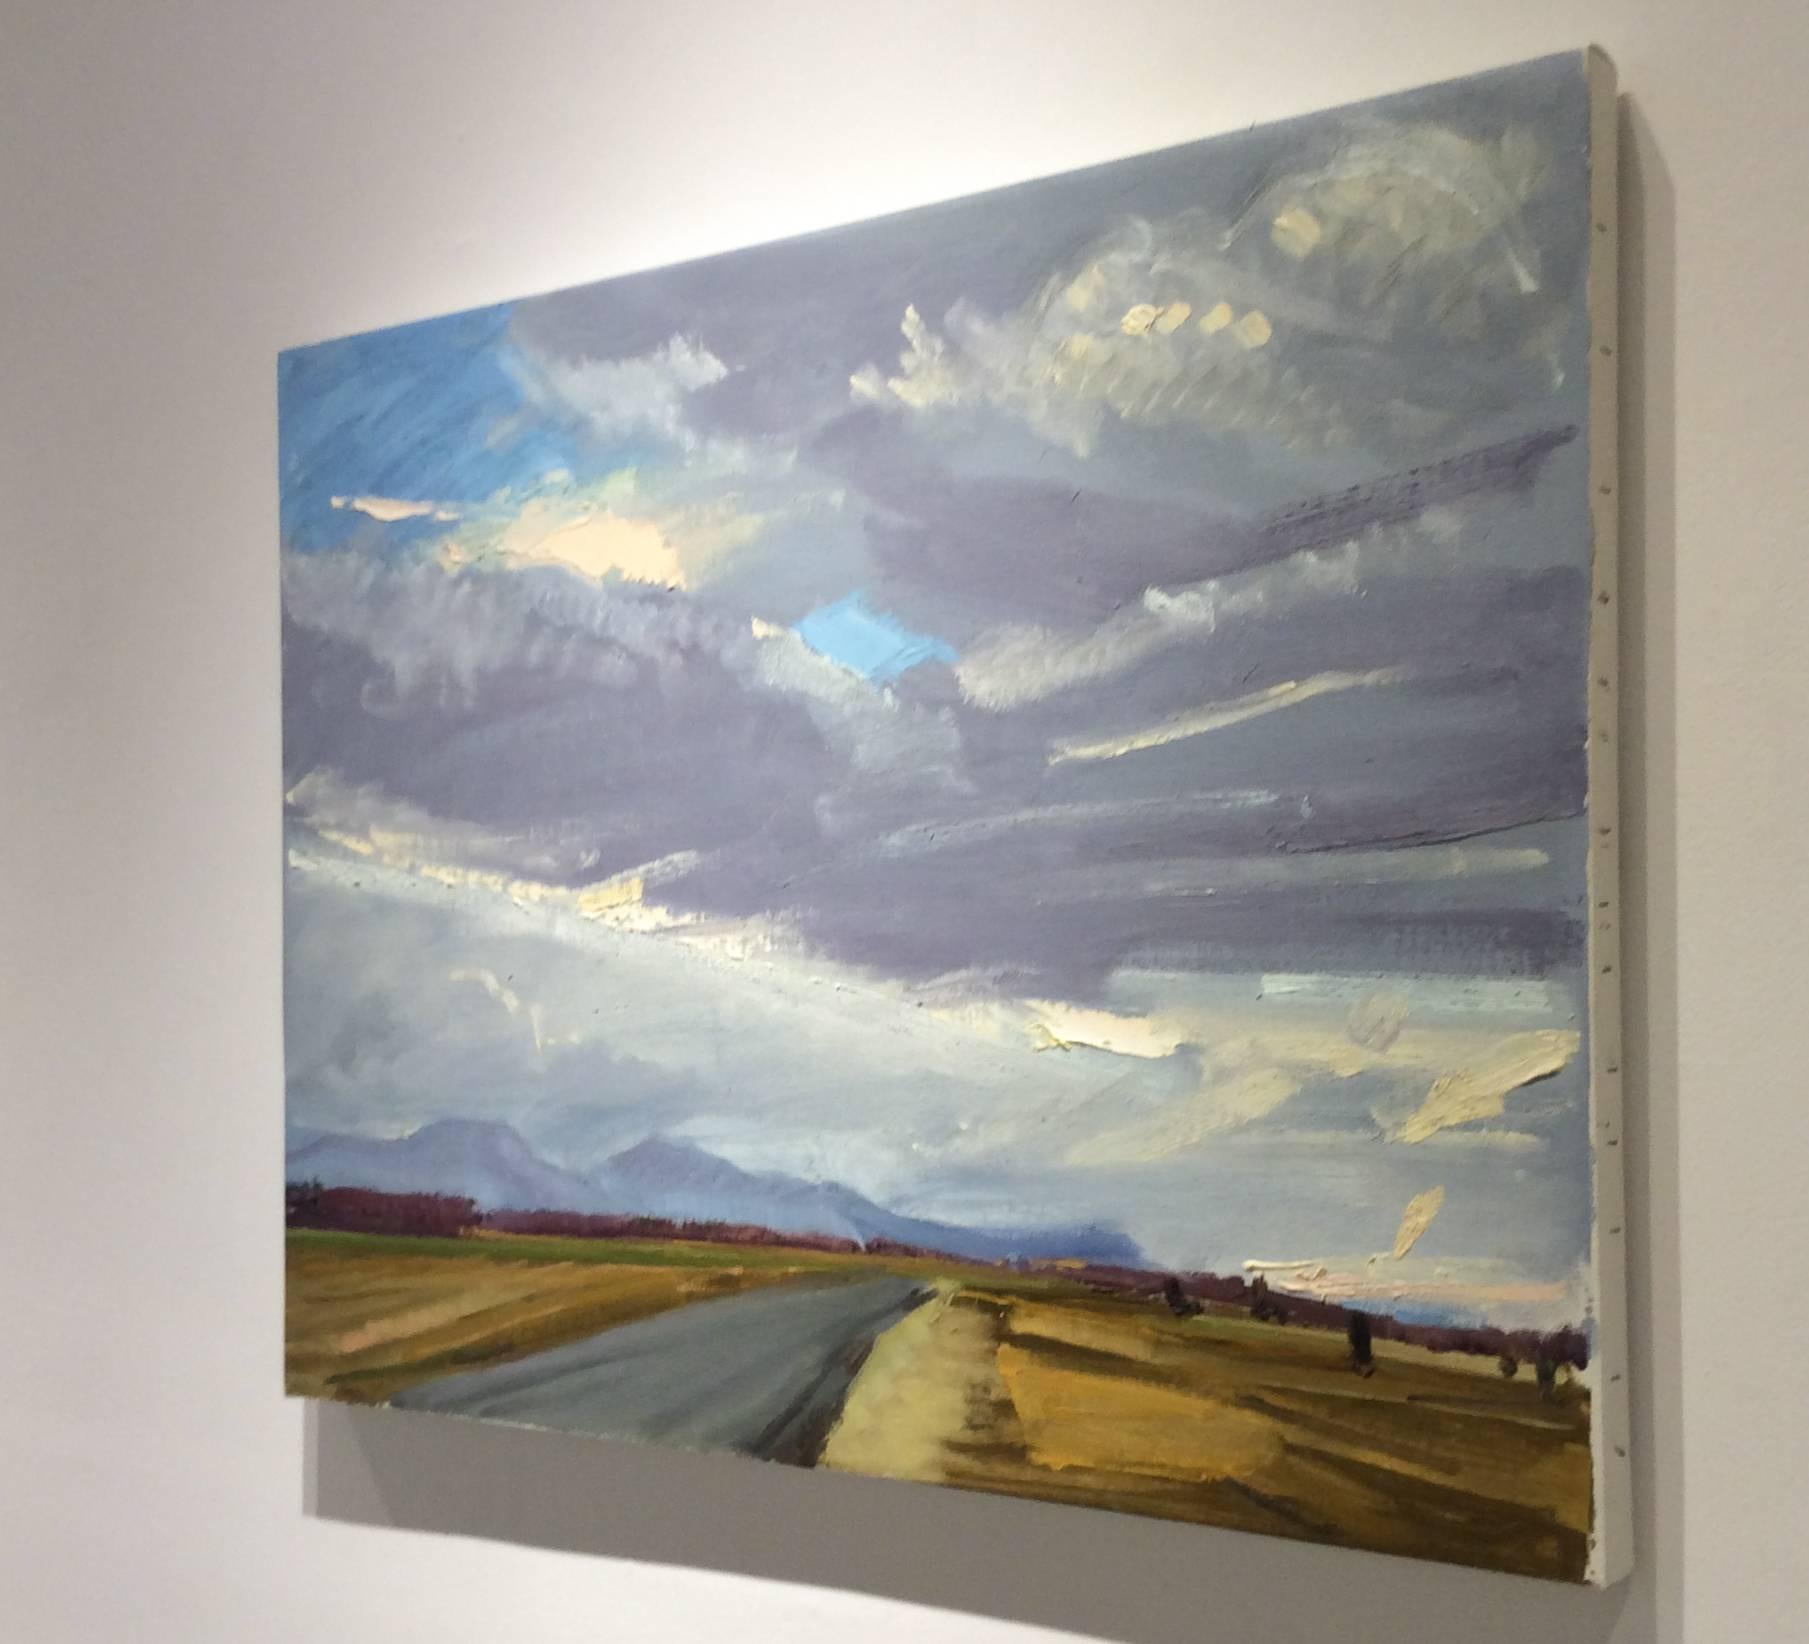 Hudson Valley landscape painting of country road with Catskill Mountains and expansive blue sky. 
Oil on linen, 26.5 x 34 inches

John Kelly approaches the Hudson Valley landscape with the eye of an architect and the hand of an impressionist. With